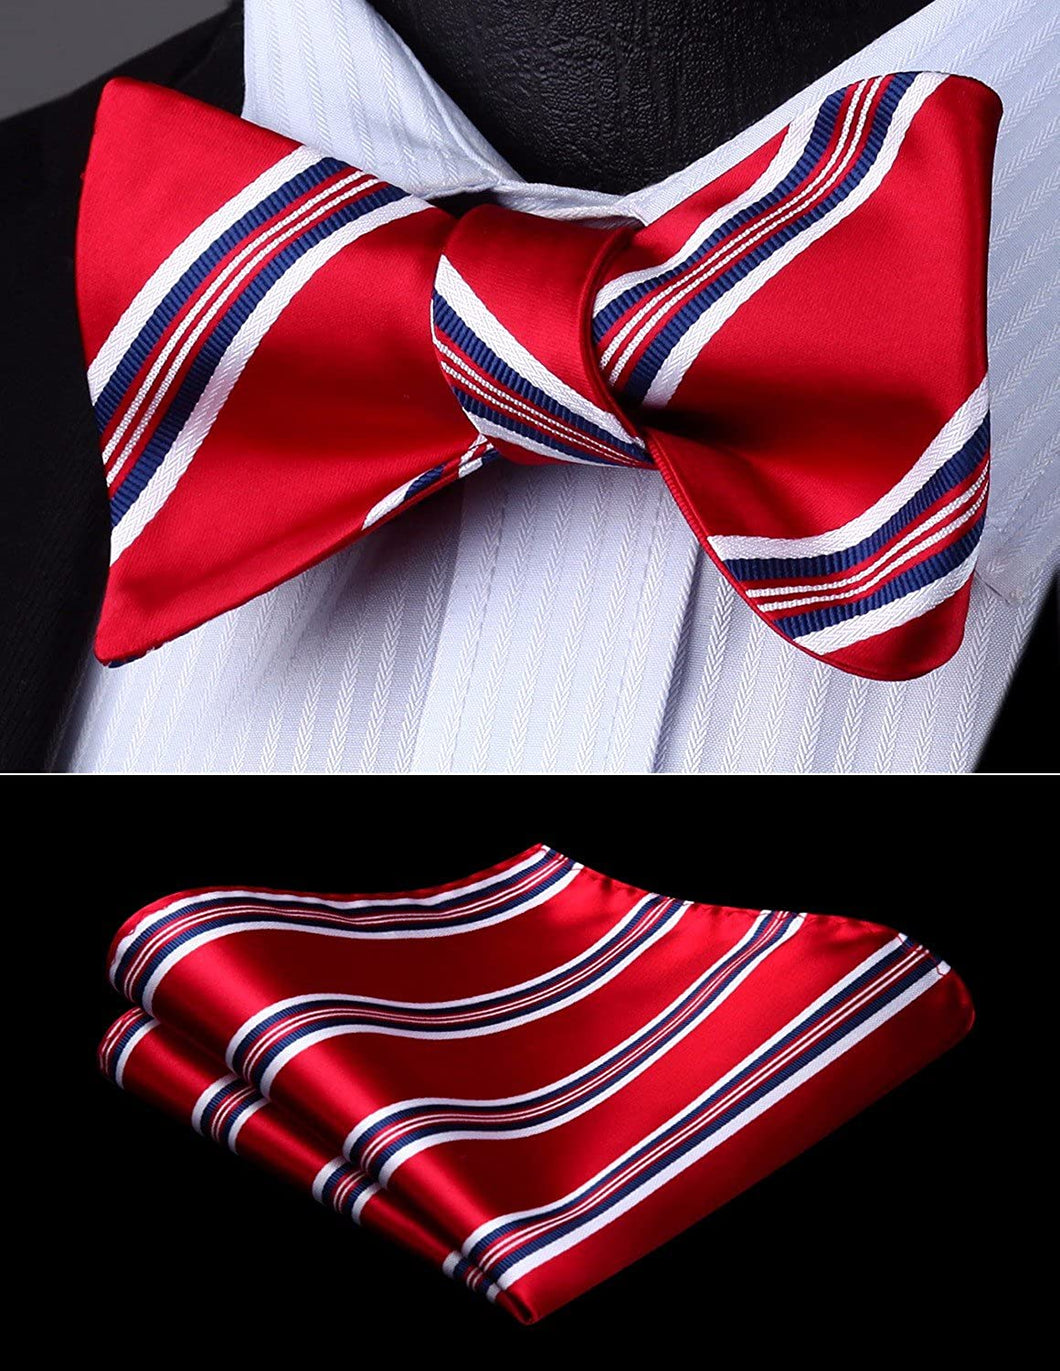 Striped Red-Blue-White Bow Tie Square Pocket Set